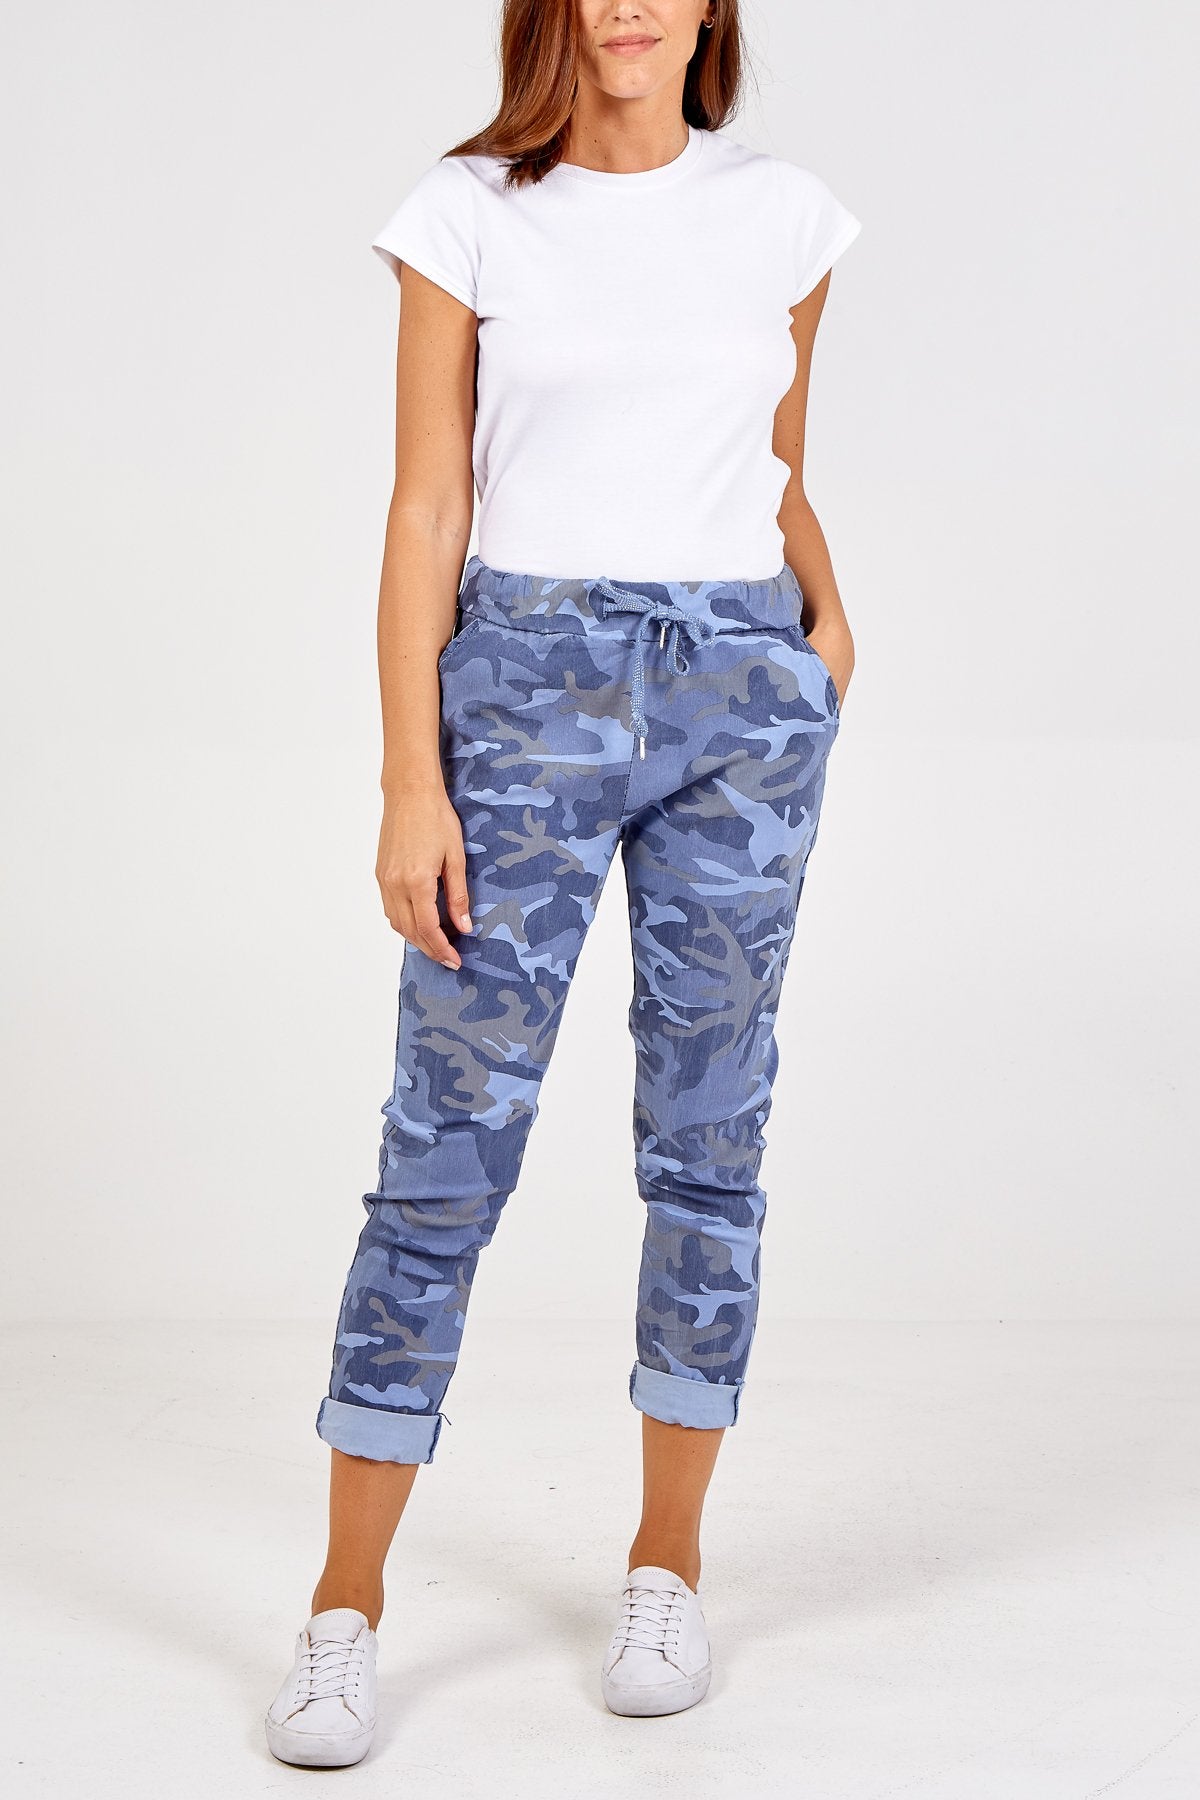 Gill Magic Camouflage Trousers - Denim Blue